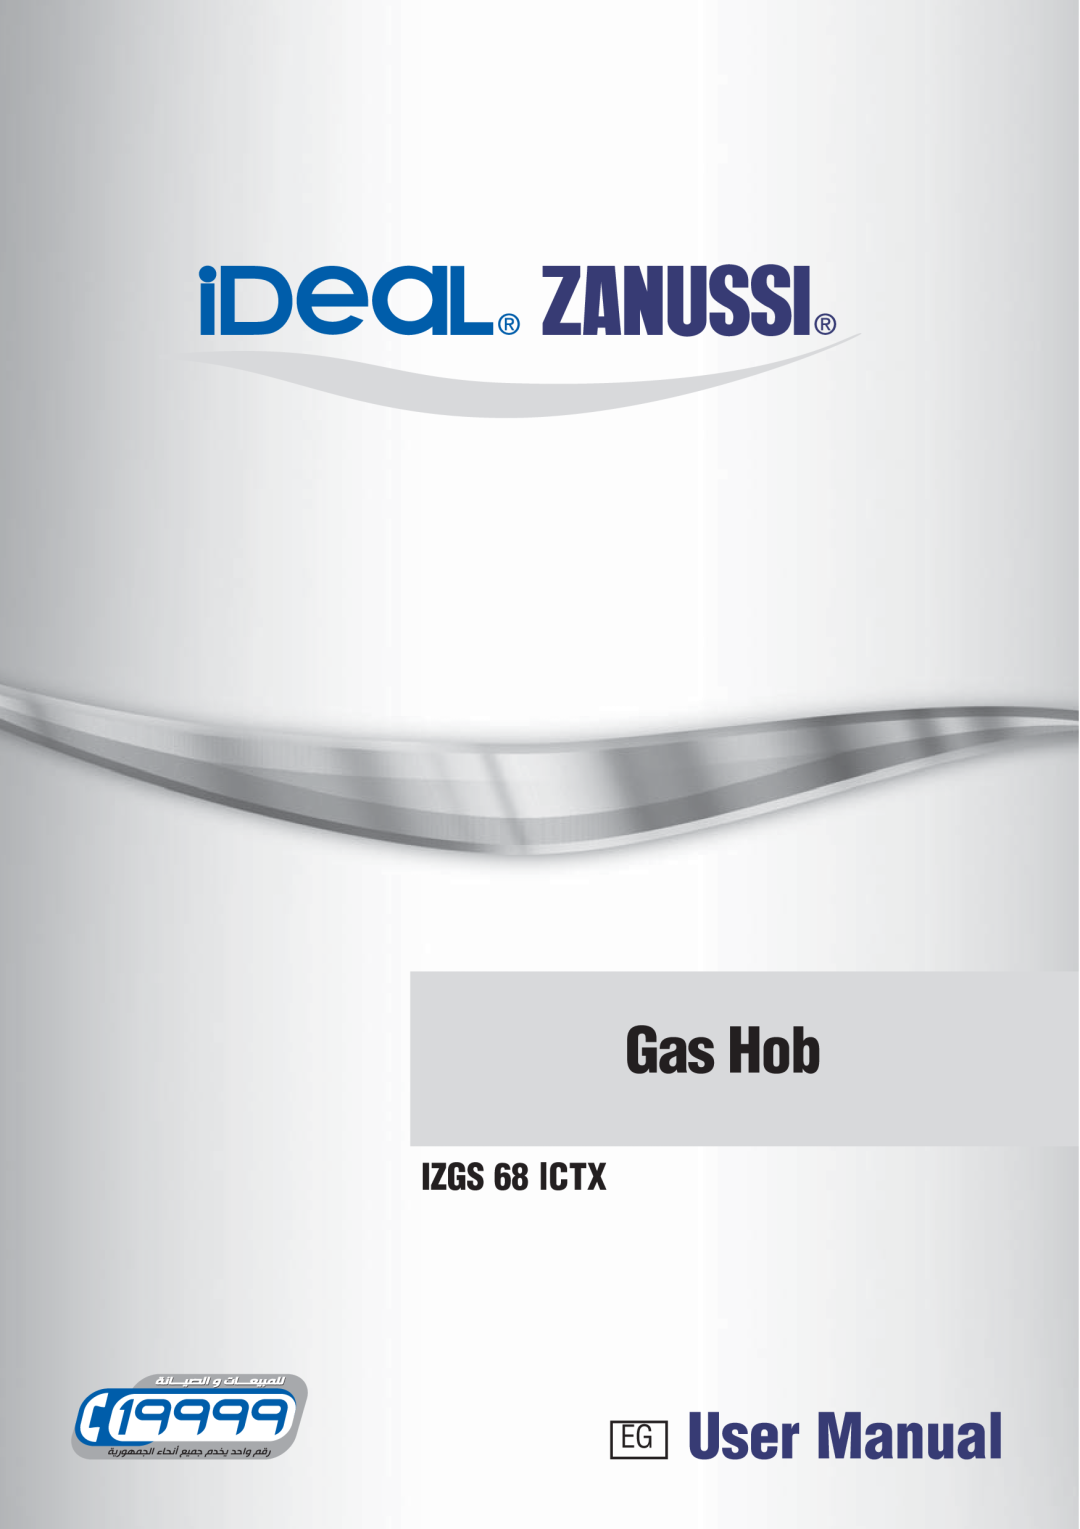 IDEAL INDUSTRIES IZGS 68 ICTX manual Gas Hob 